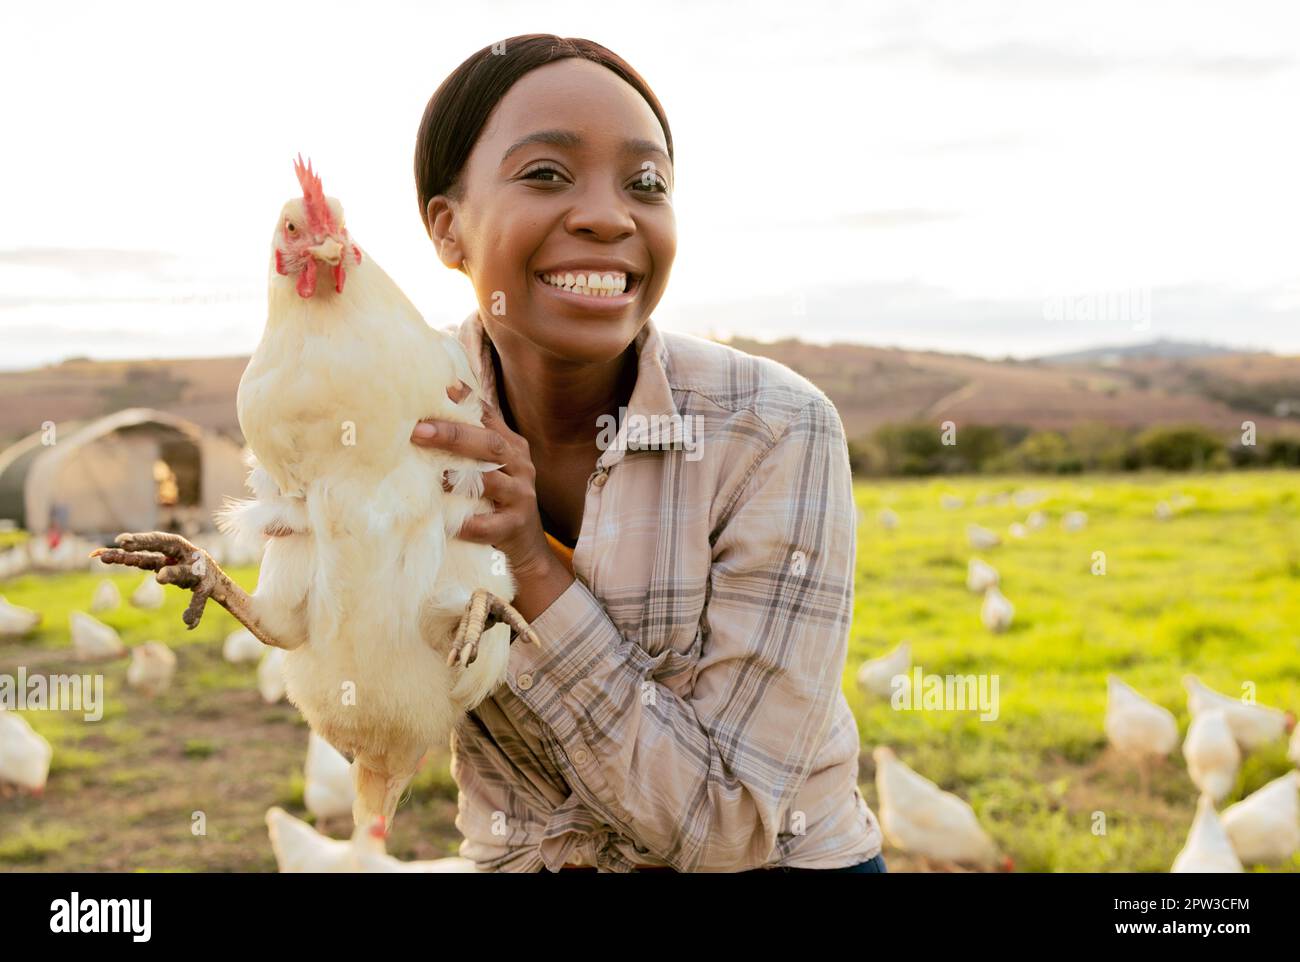 427 African Chicken Farmer Images, Stock Photos, 3D objects, & Vectors